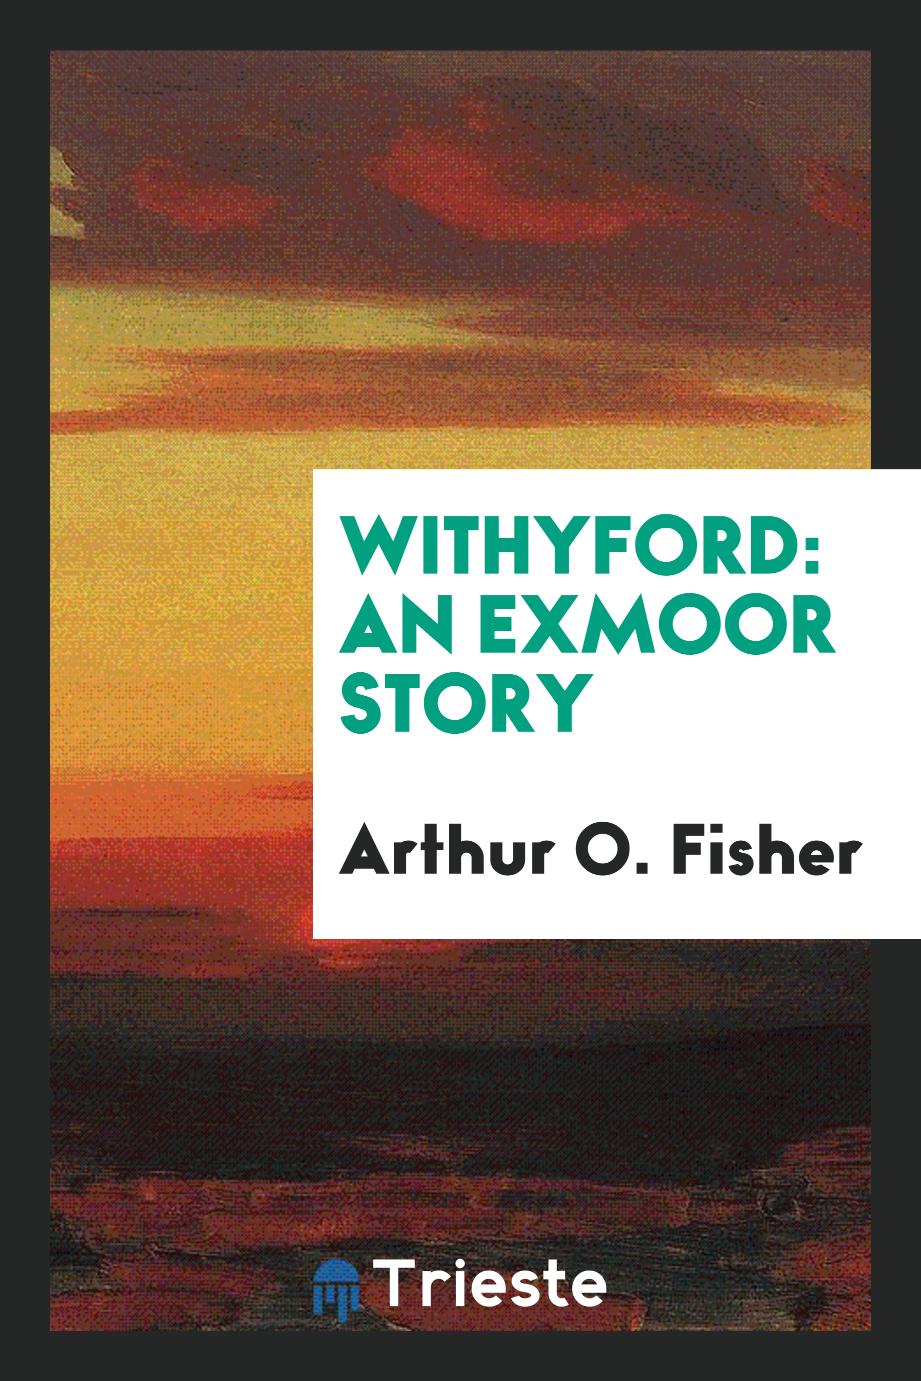 Withyford: An Exmoor Story